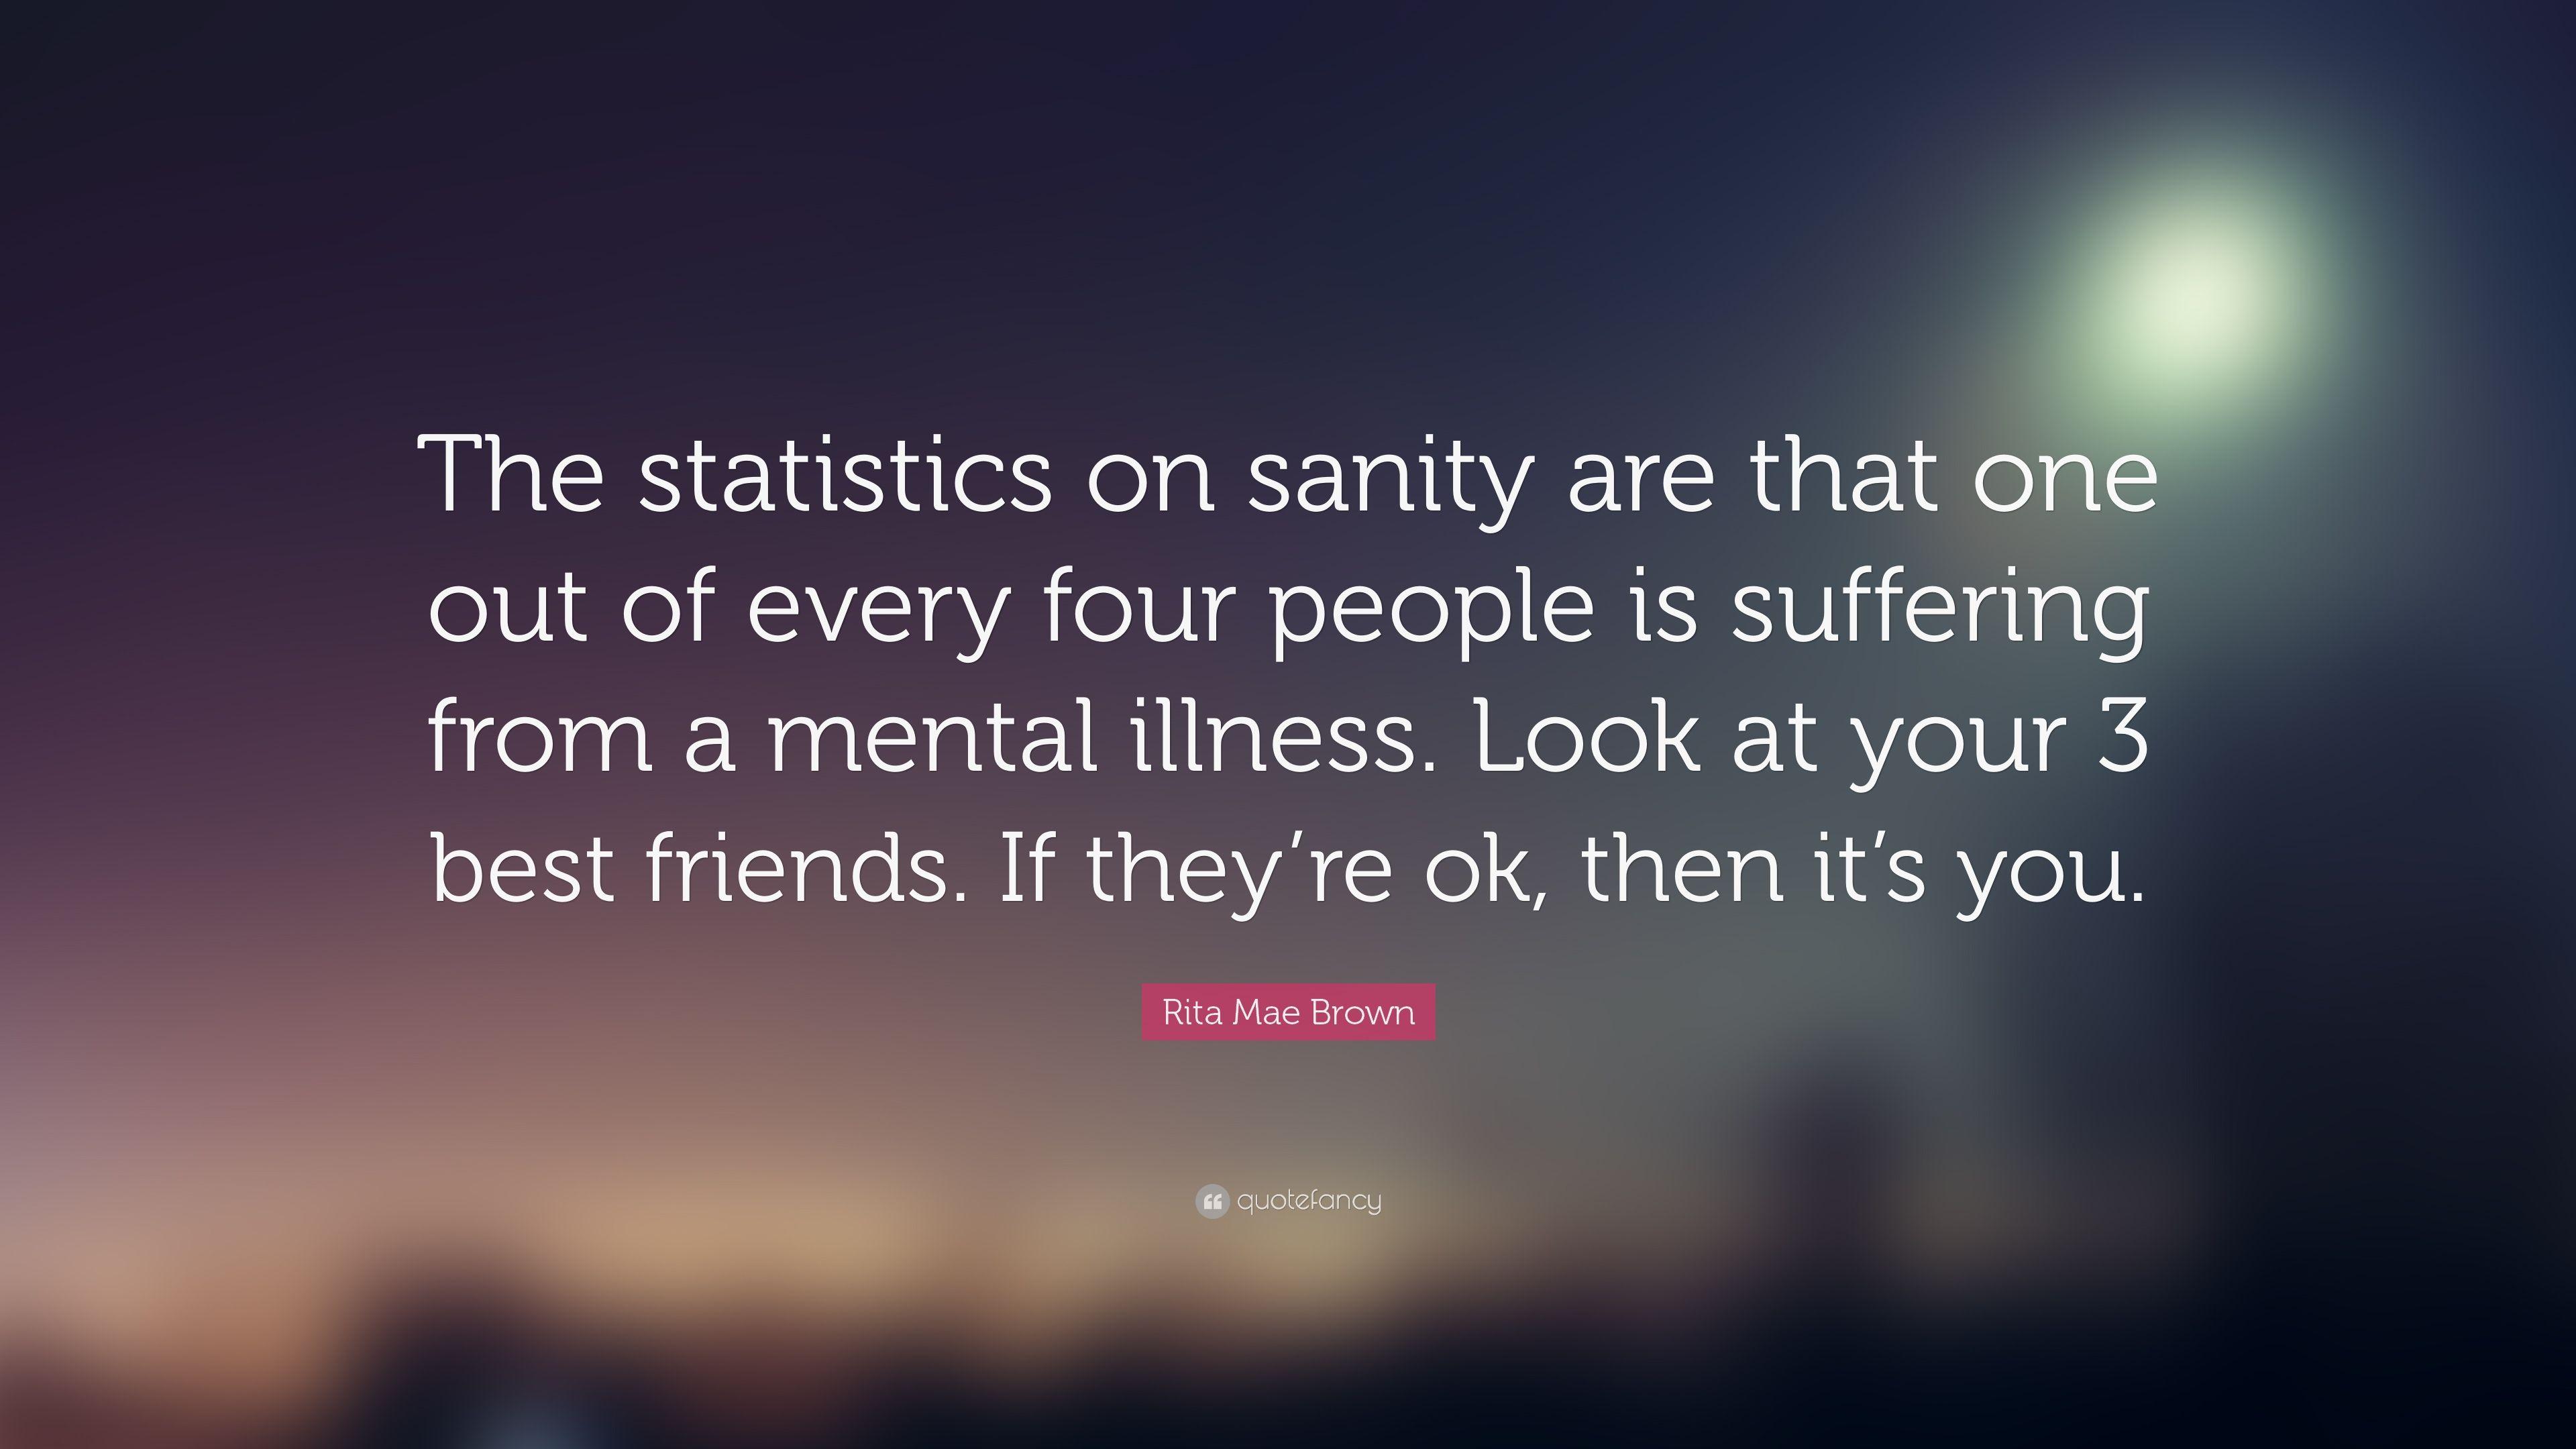 Rita Mae Brown Quote: “The statistics on sanity are that one out